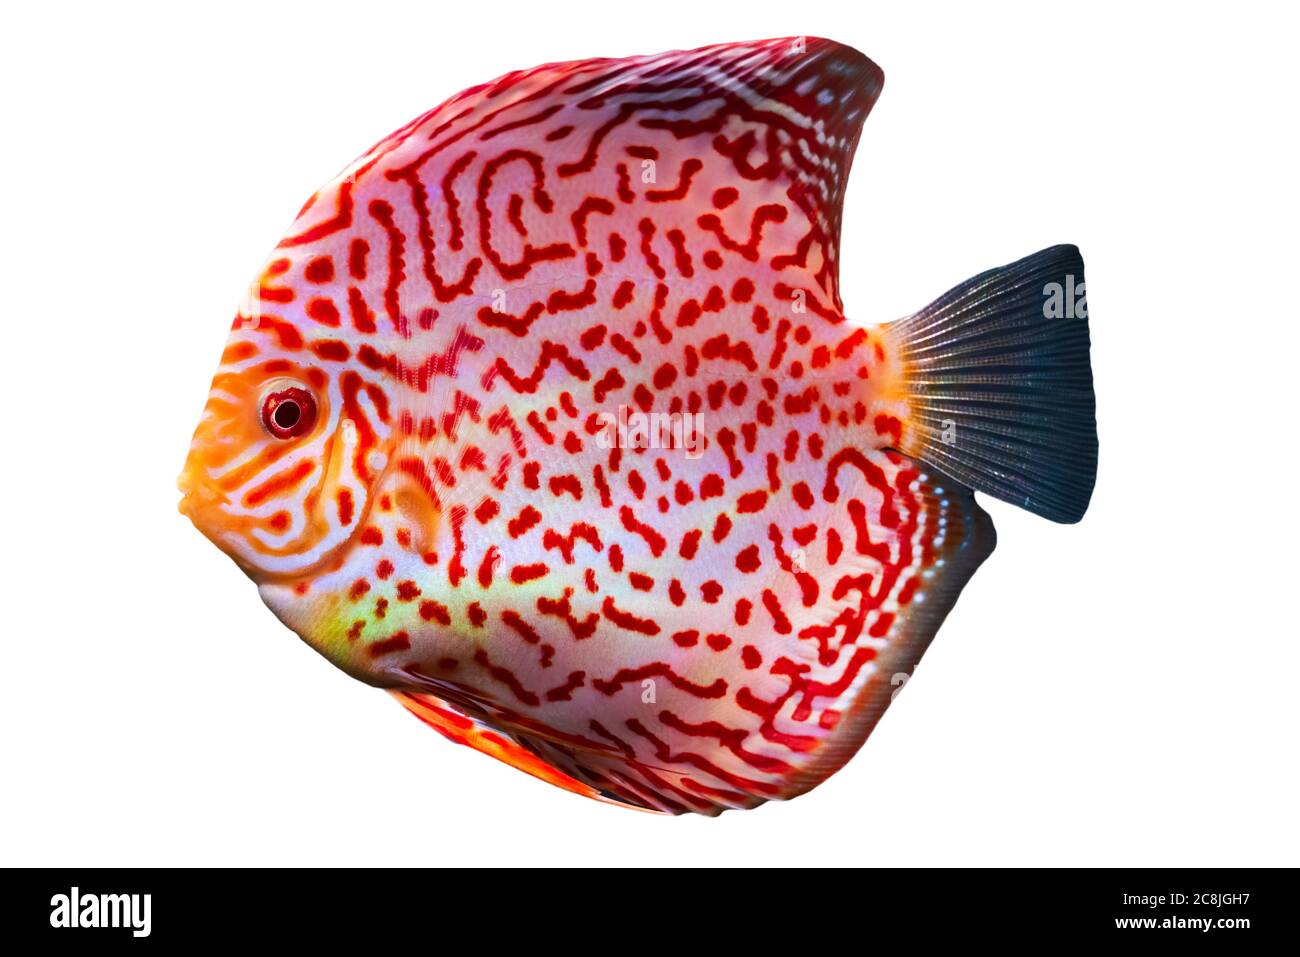 Closeup of a checkerboard red tropical Symphysodon discus fish. Isolated on white background. Stock Photo